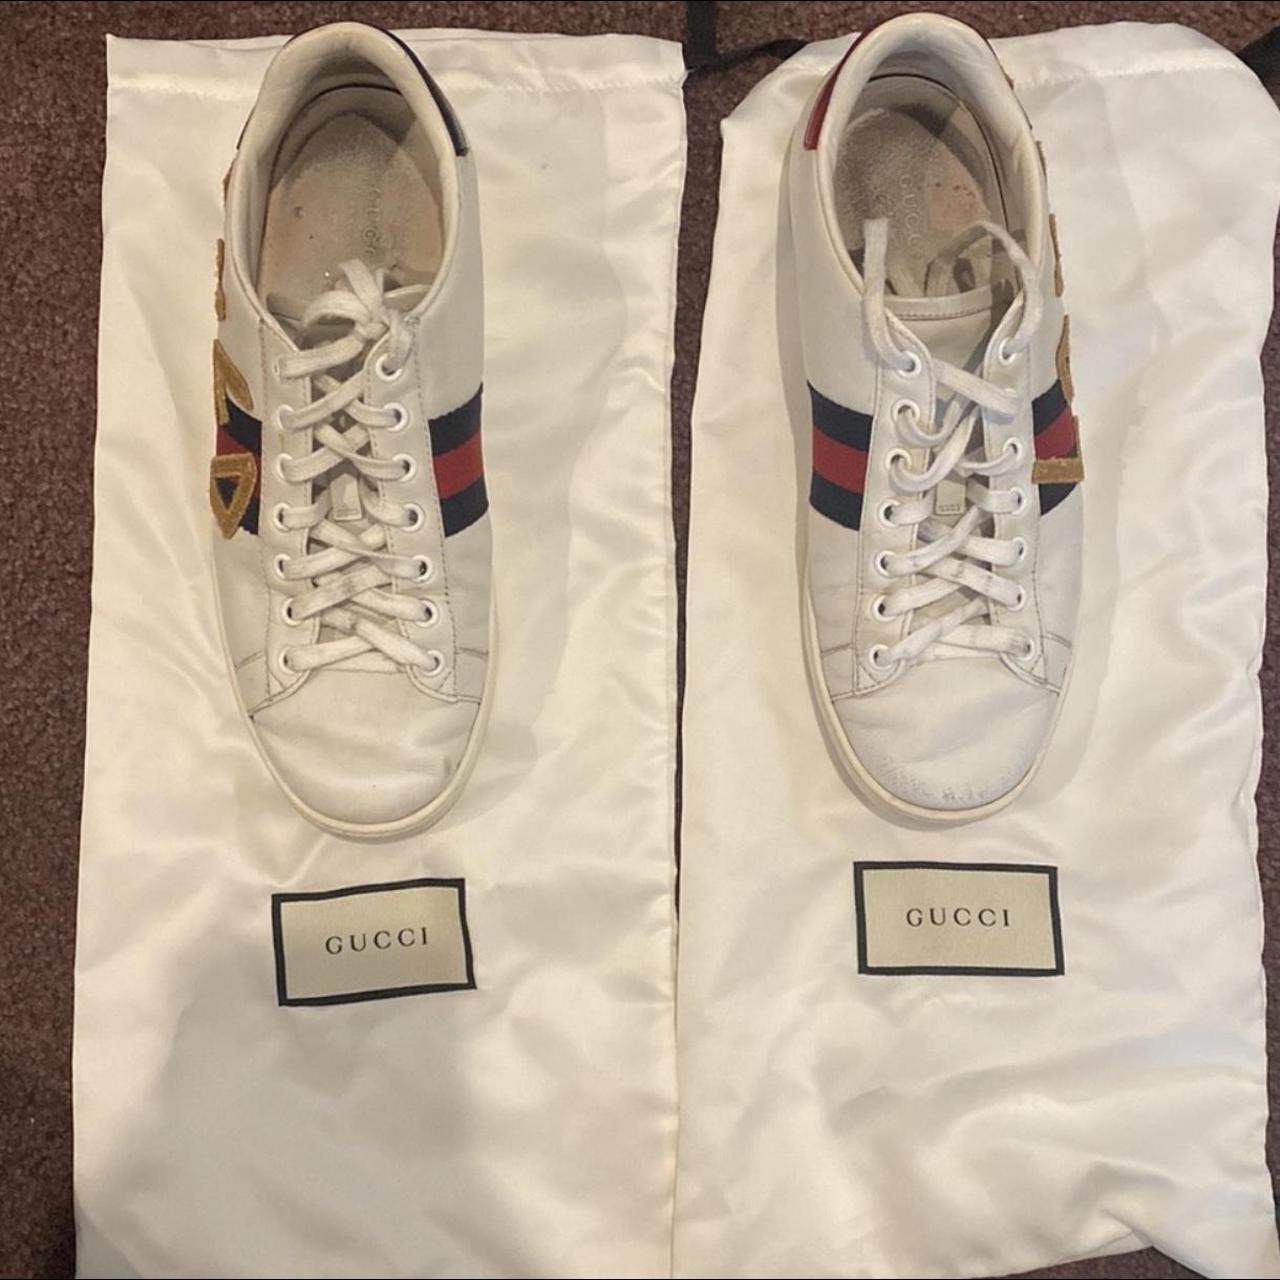 Where is the serial number on gucci sneakers? - Quora